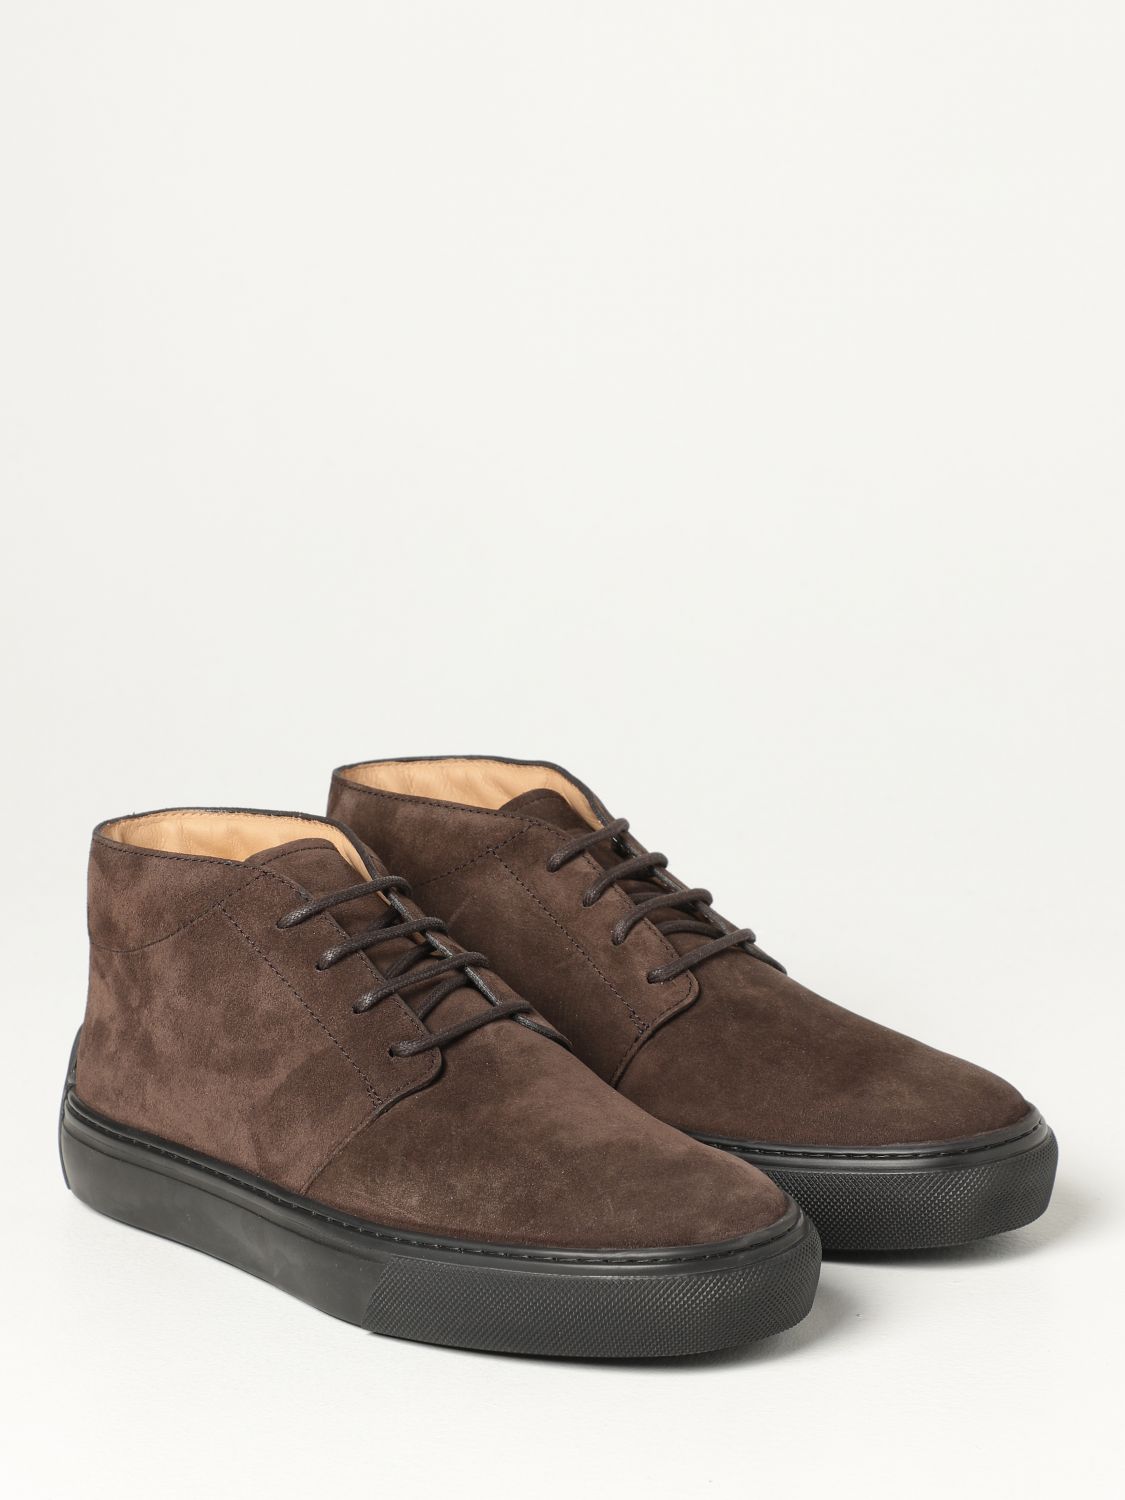 Desert boots Tod's: Tod's ankle boot in suede dark 2